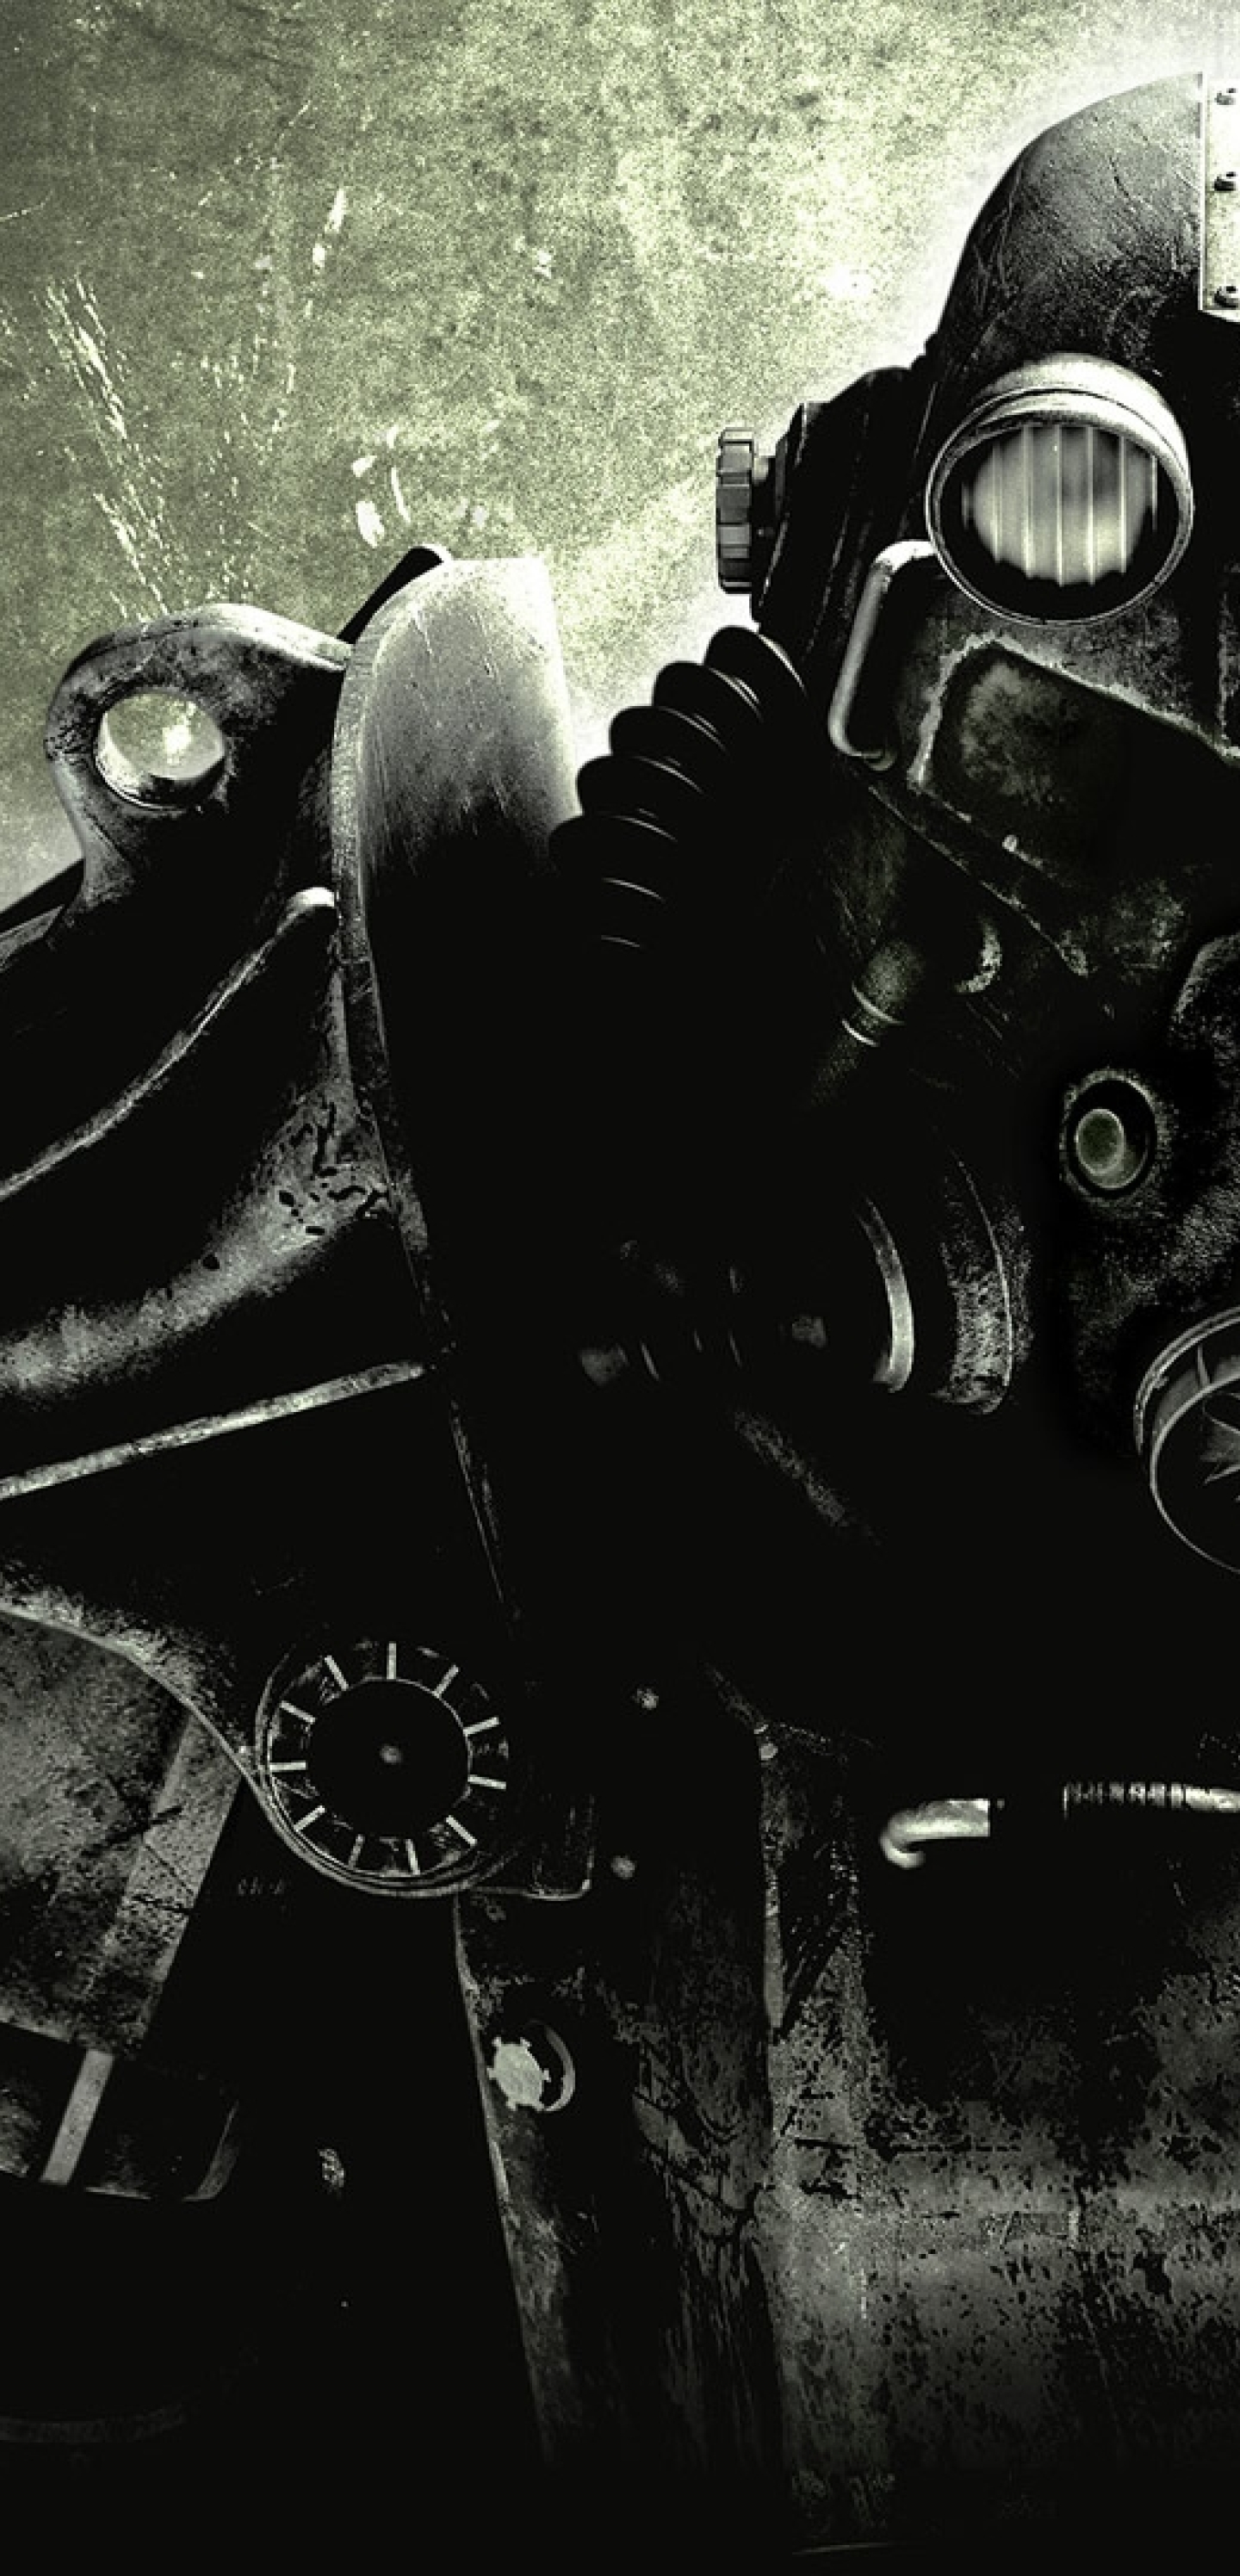 1440x2992 Fallout Equipment Look 1440x2992 Resolution Wallpaper Hd Games 4k Wallpapers Images Photos And Background Wallpapers Den